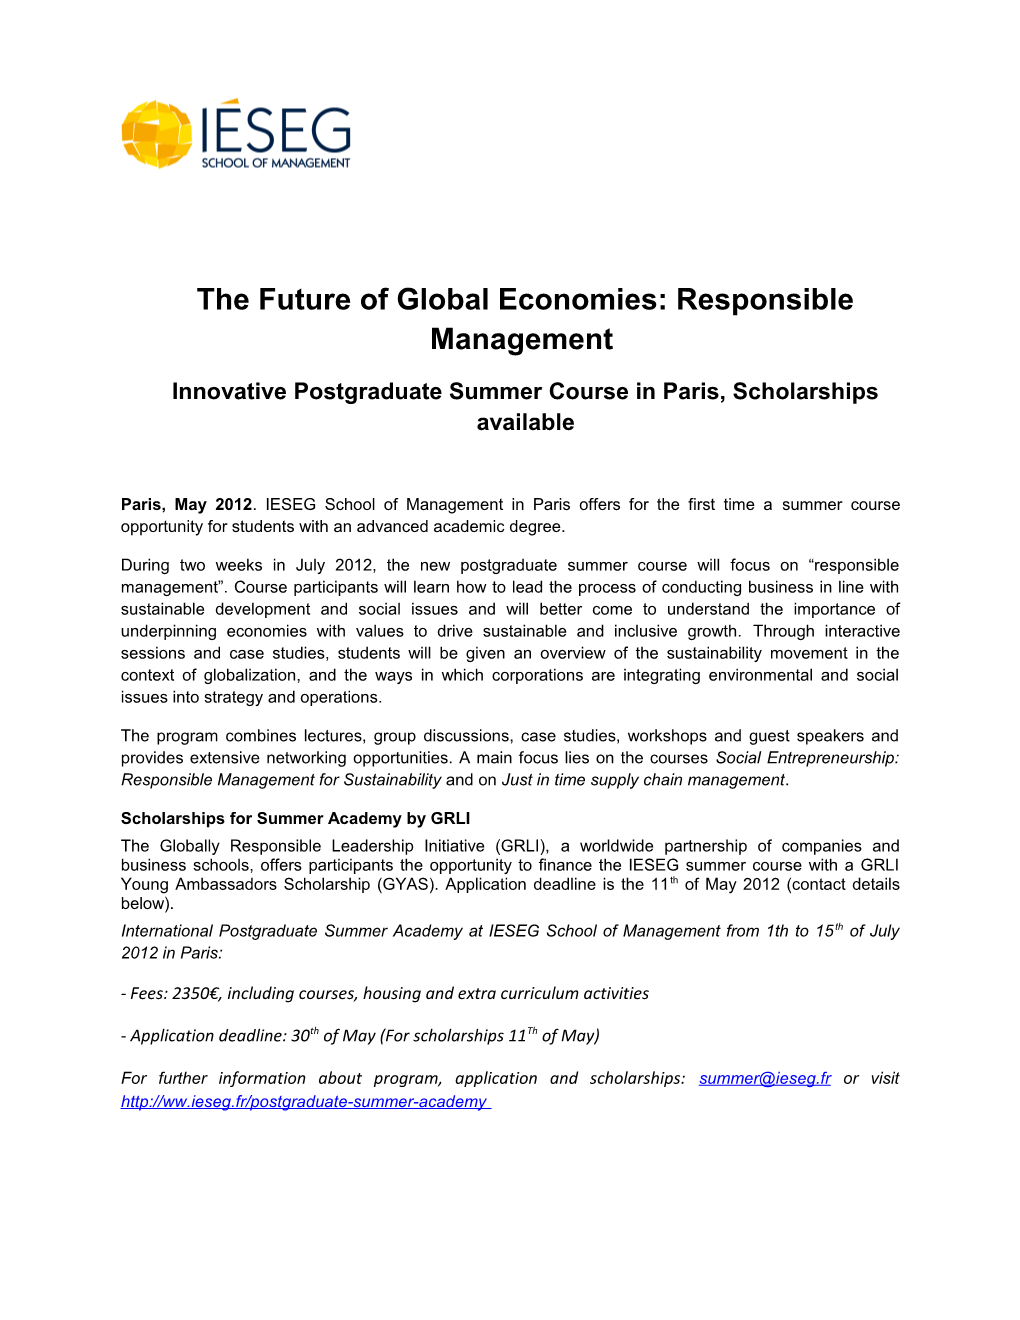 The Future of Global Economies: Responsible Management